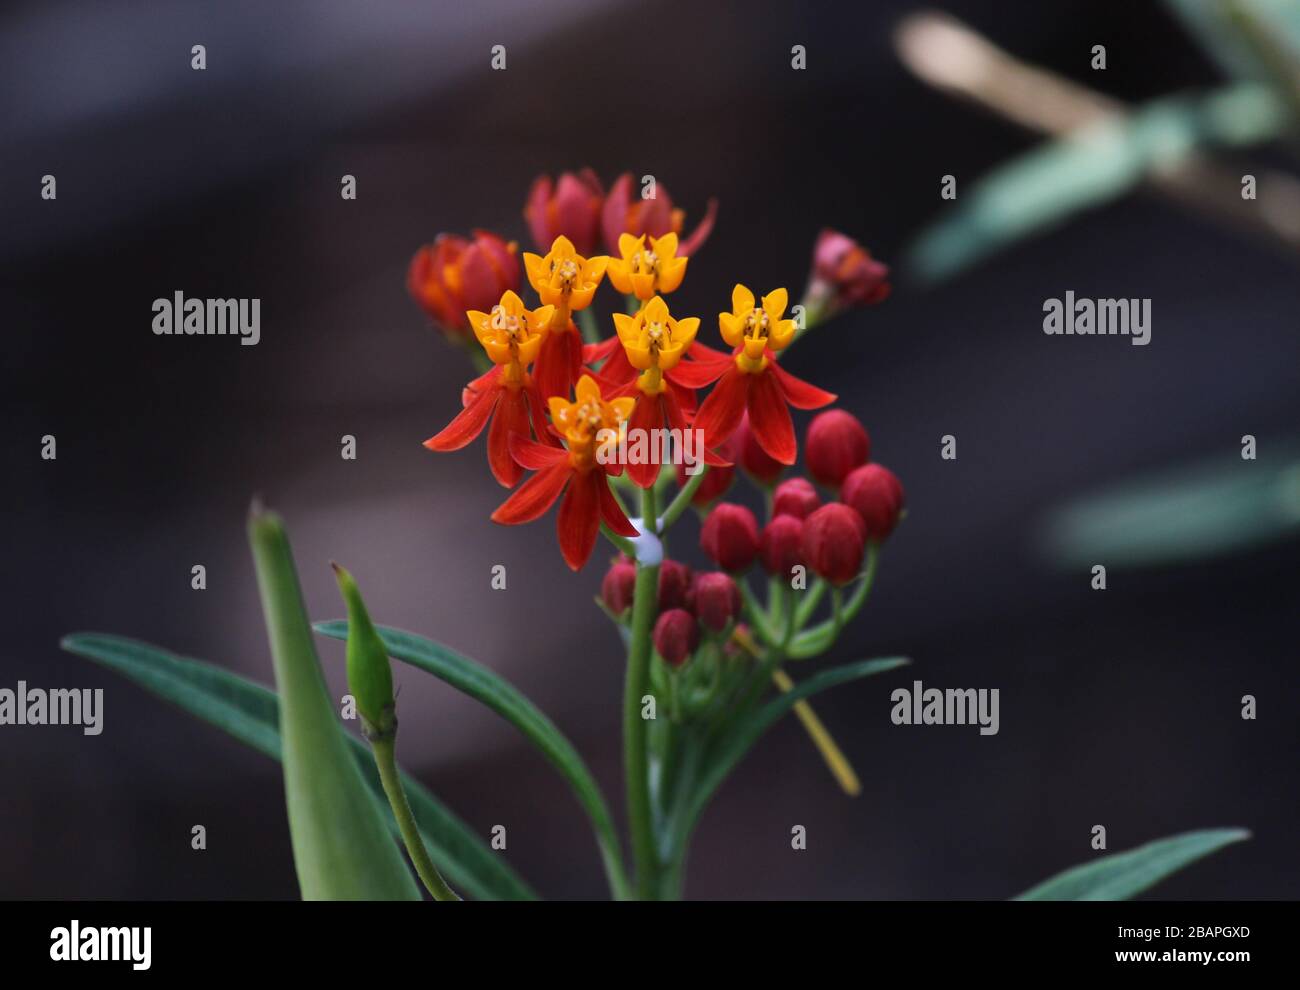 bright red yellow flowers and white mily sap of a typical butterfly weed in butterfly garden Stock Photo